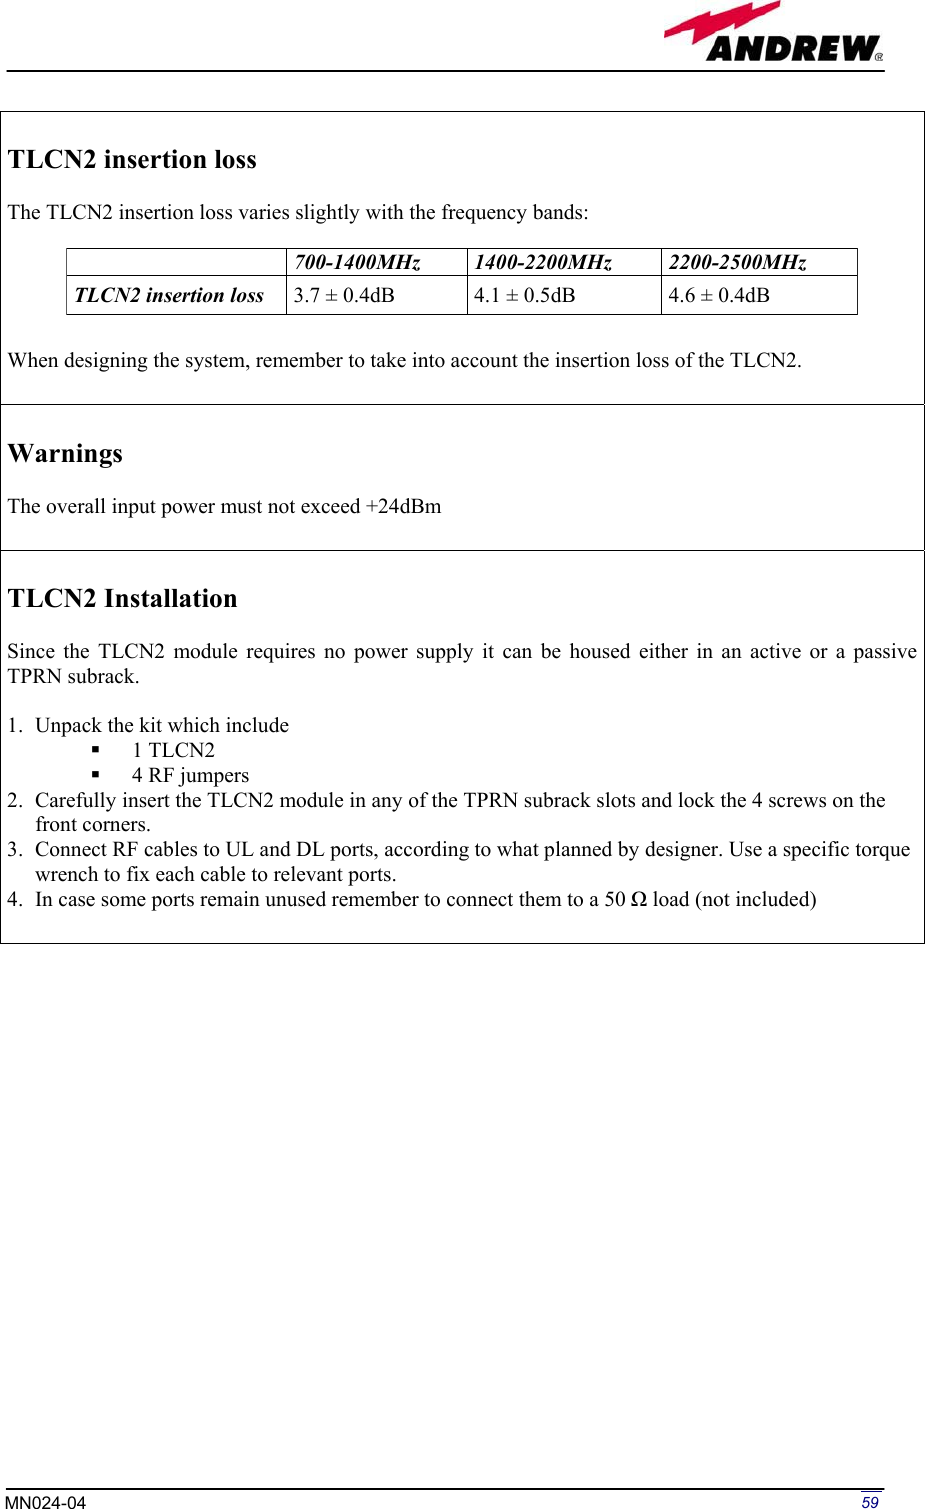 Page 59 of Andrew Wireless Innovations Group BCP-TFAM23 Model TFAM23 Downlink Booster User Manual MN024 04 rev3